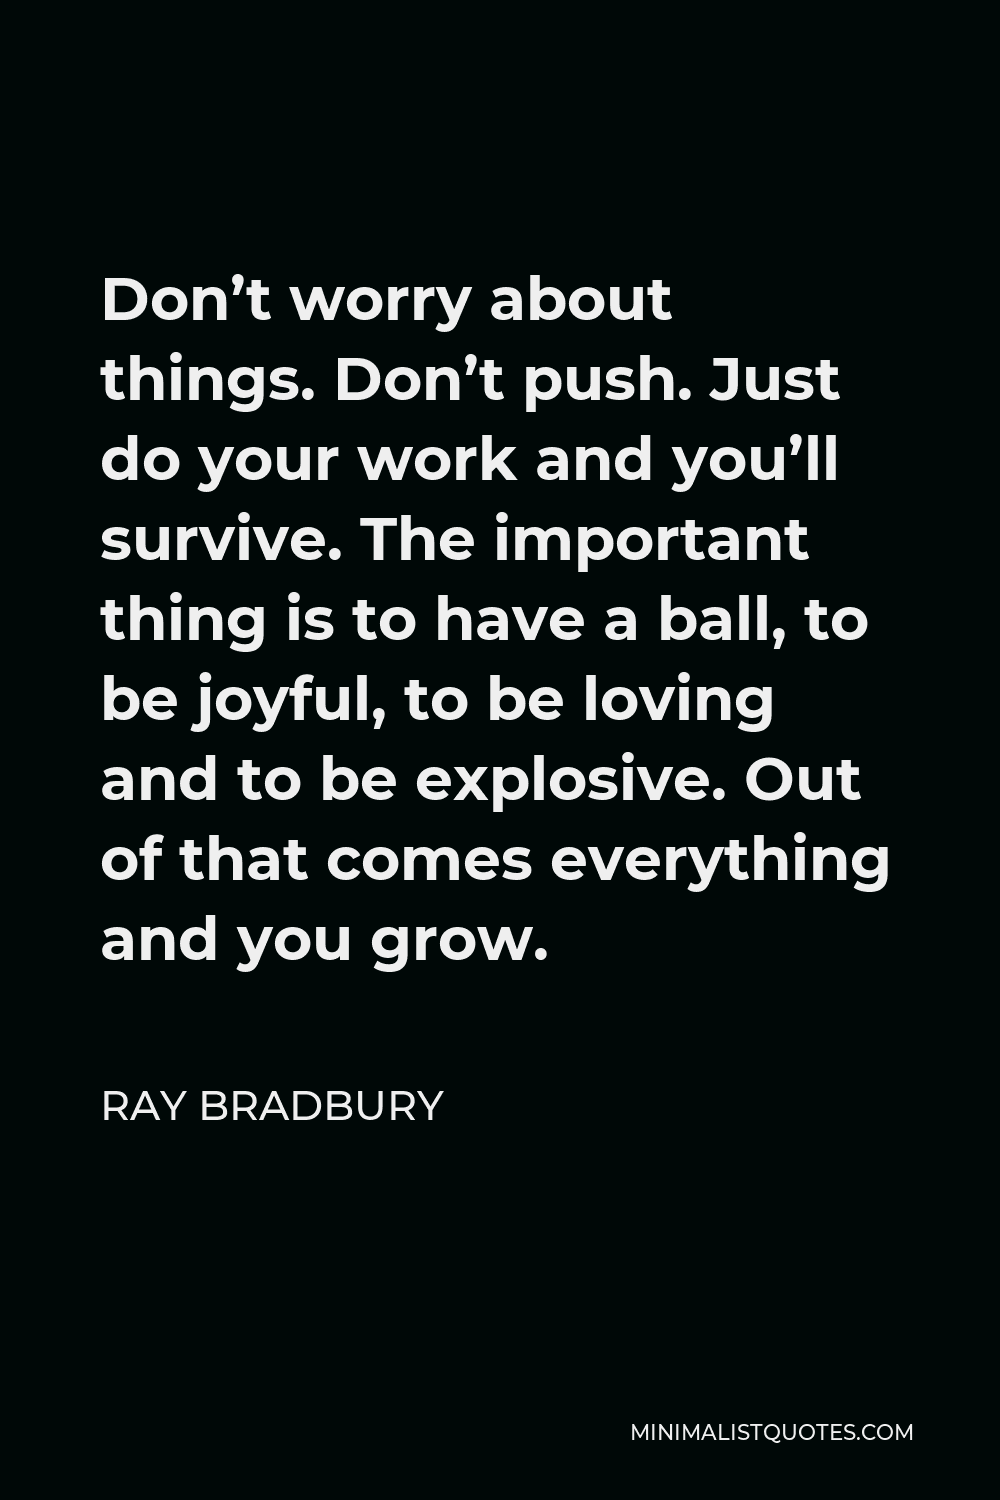 Ray Bradbury Quote - Don’t worry about things. Don’t push. Just do your work and you’ll survive. The important thing is to have a ball, to be joyful, to be loving and to be explosive. Out of that comes everything and you grow.